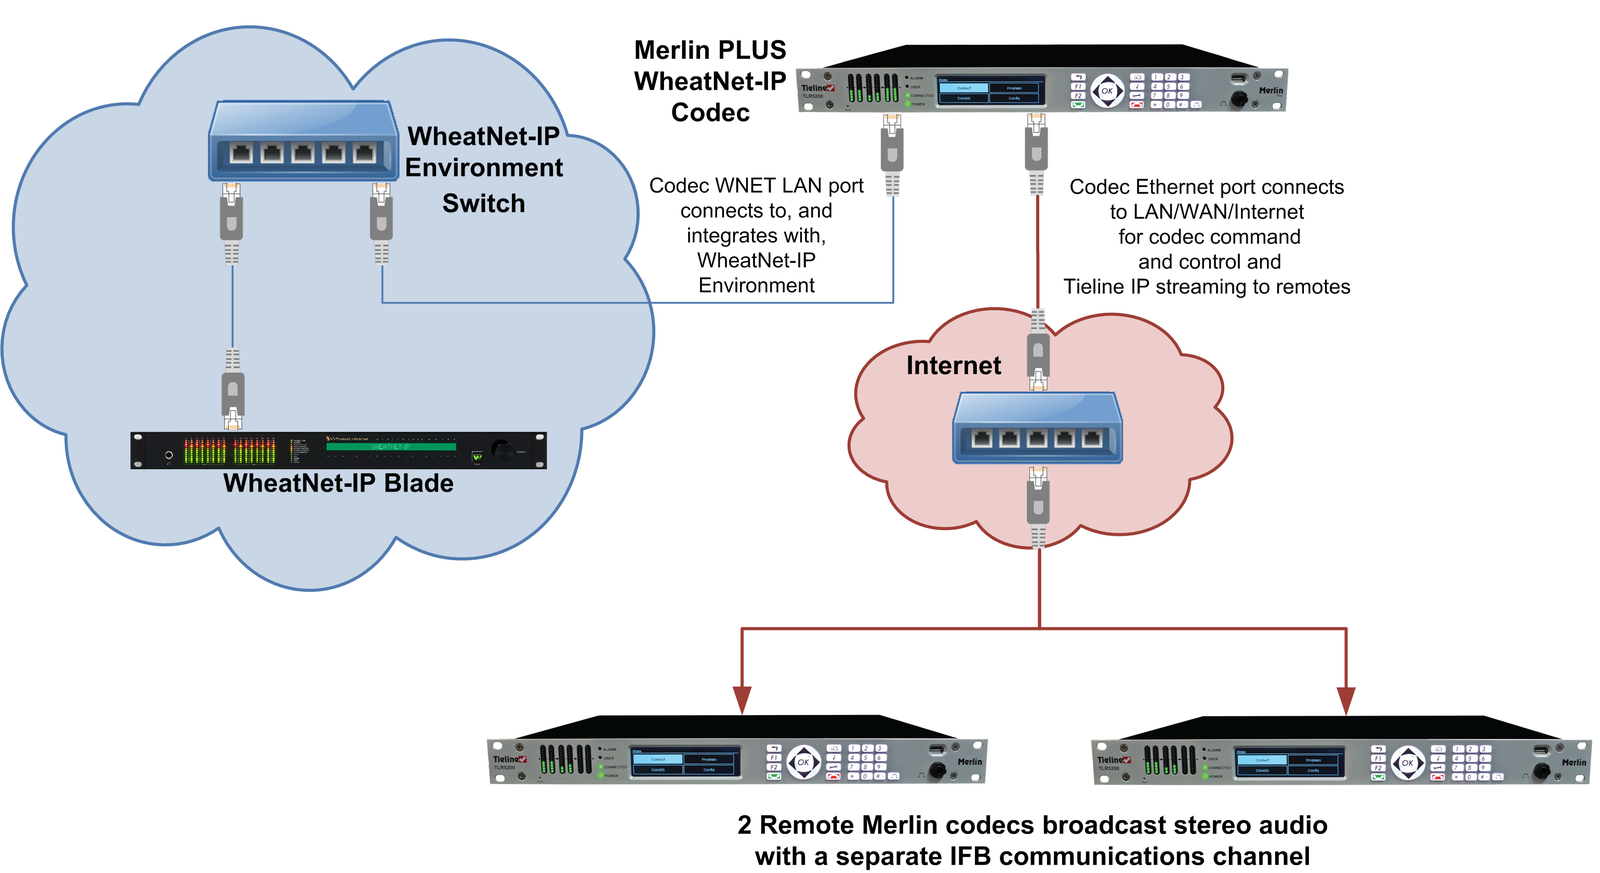 894_Merlin_PLUS_WheatNet-IP_2_x_stereo_comms_overview_20130726